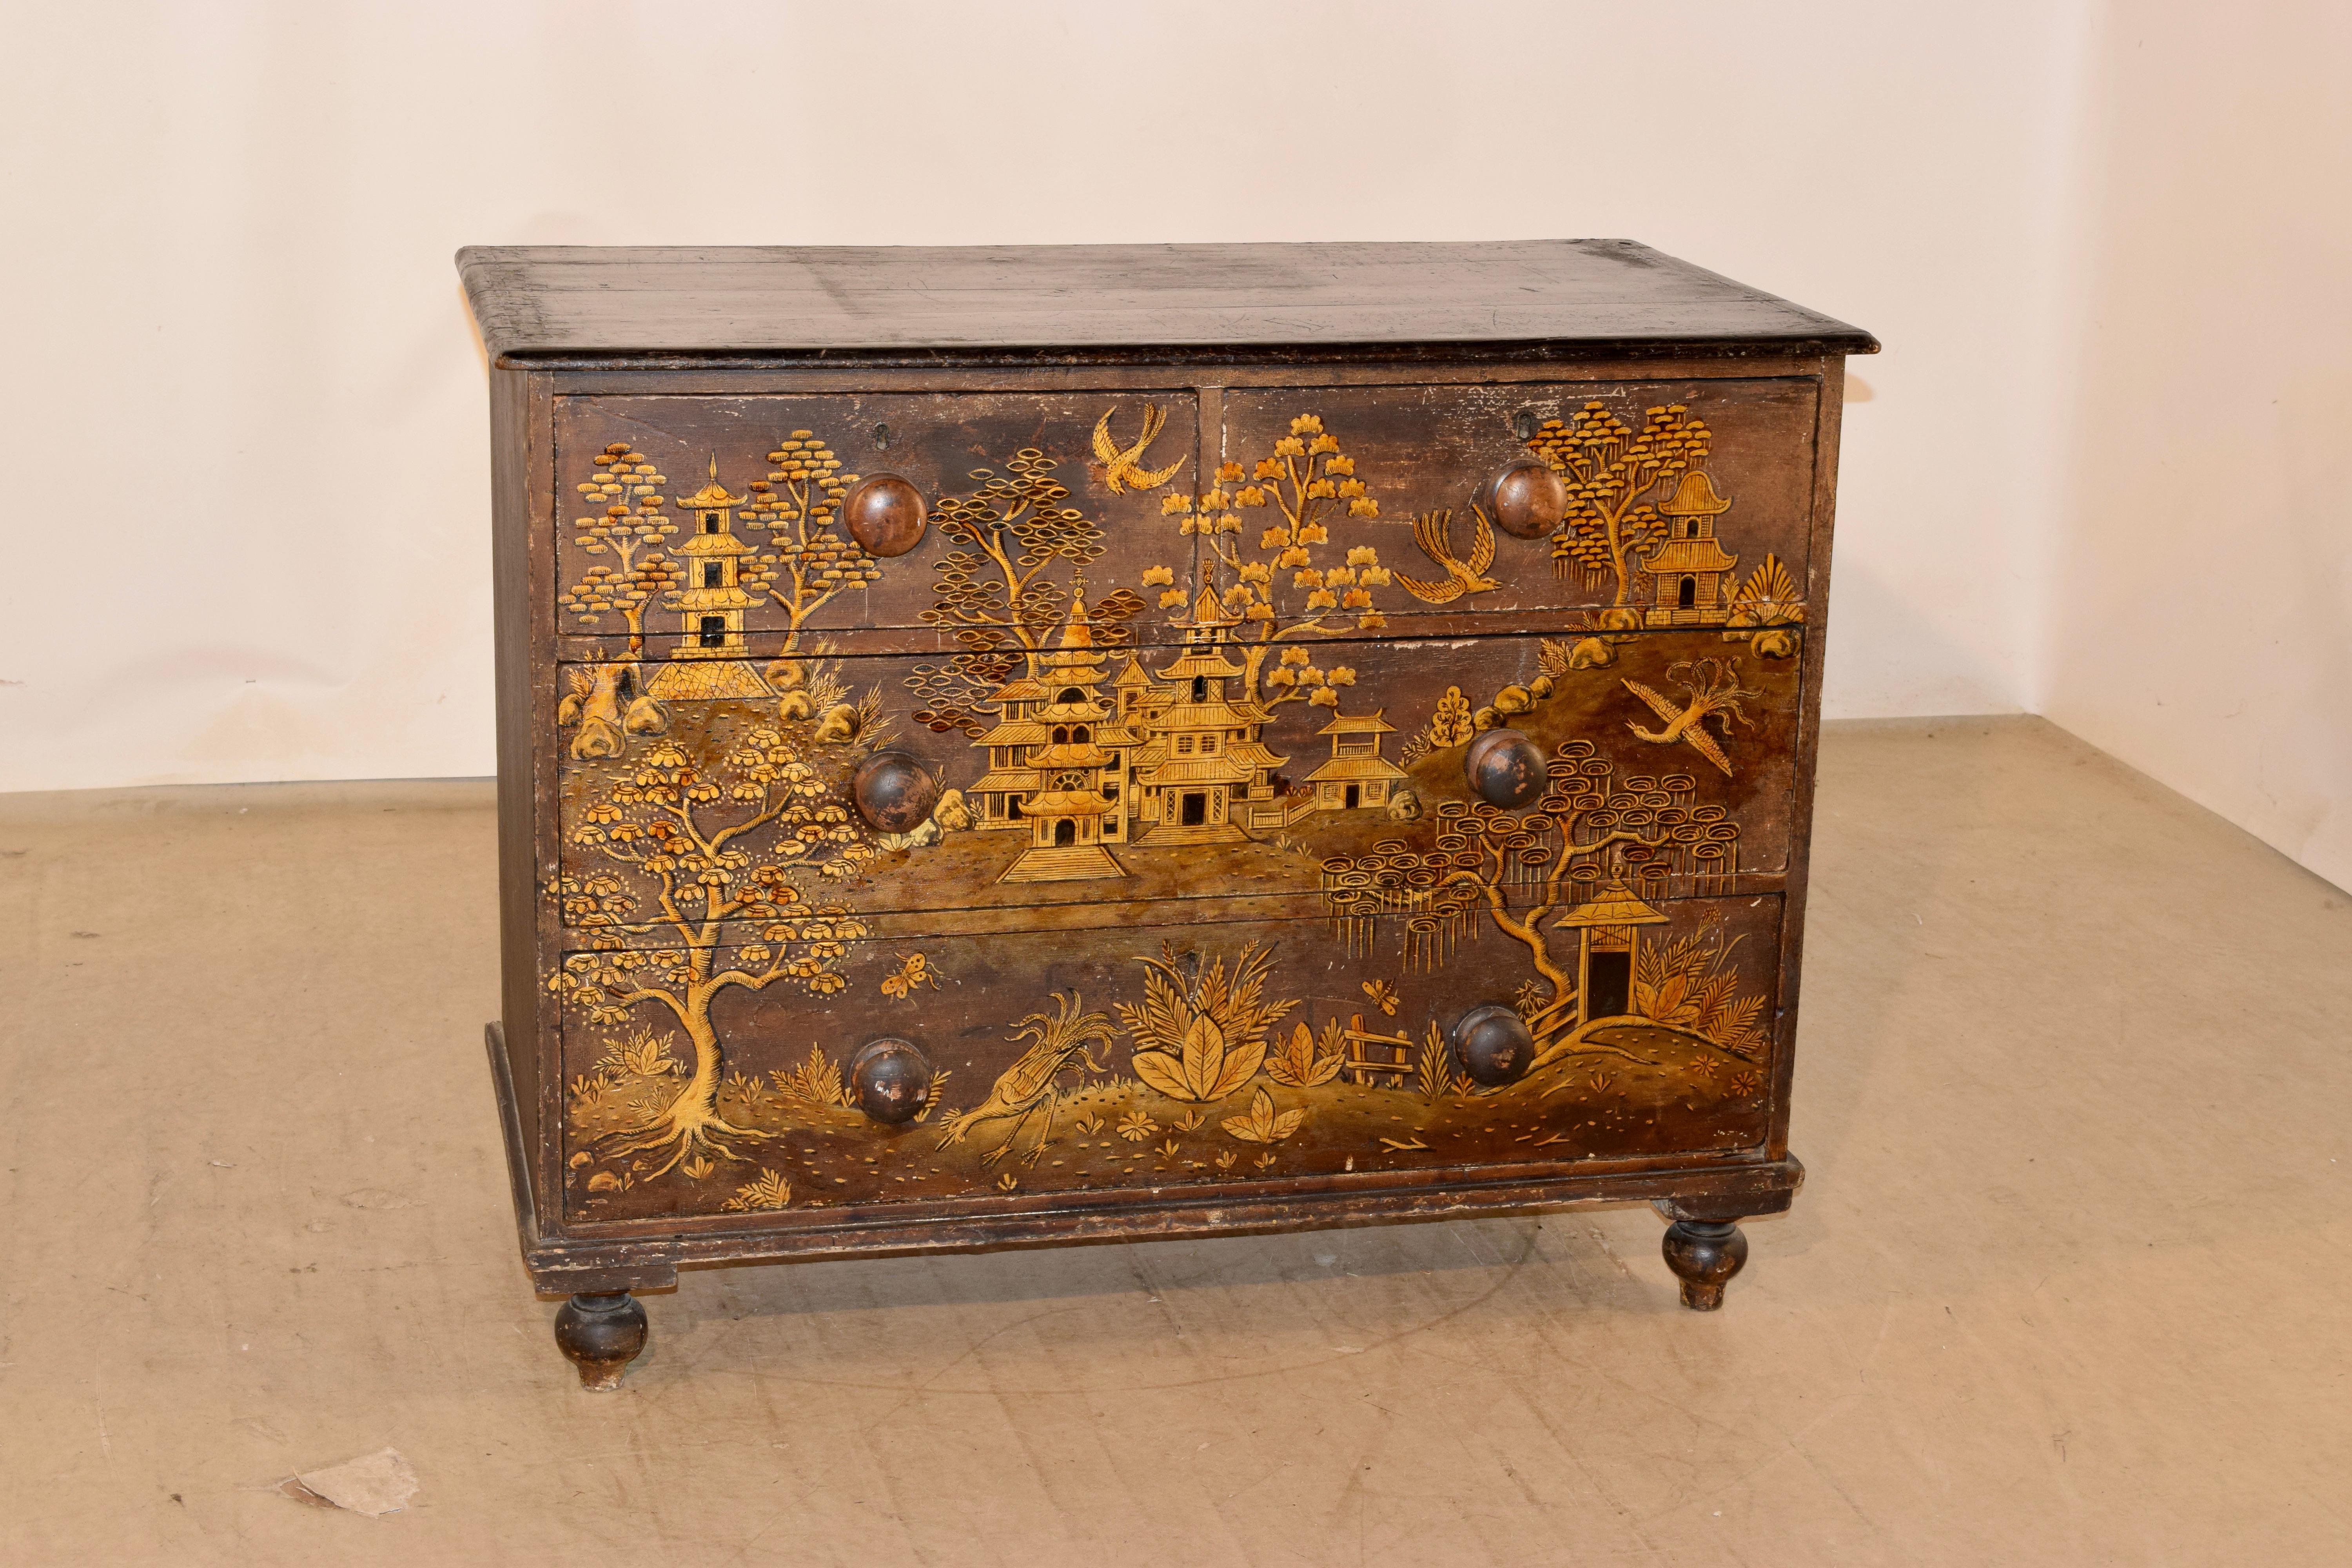 19th century English pine chest of drawers with hand painted chinoiserie decoration. The top has a molded edge and follows down to two small drawers over two larger drawers, all with hand painted chinoiserie decoration. The sides are simple and the